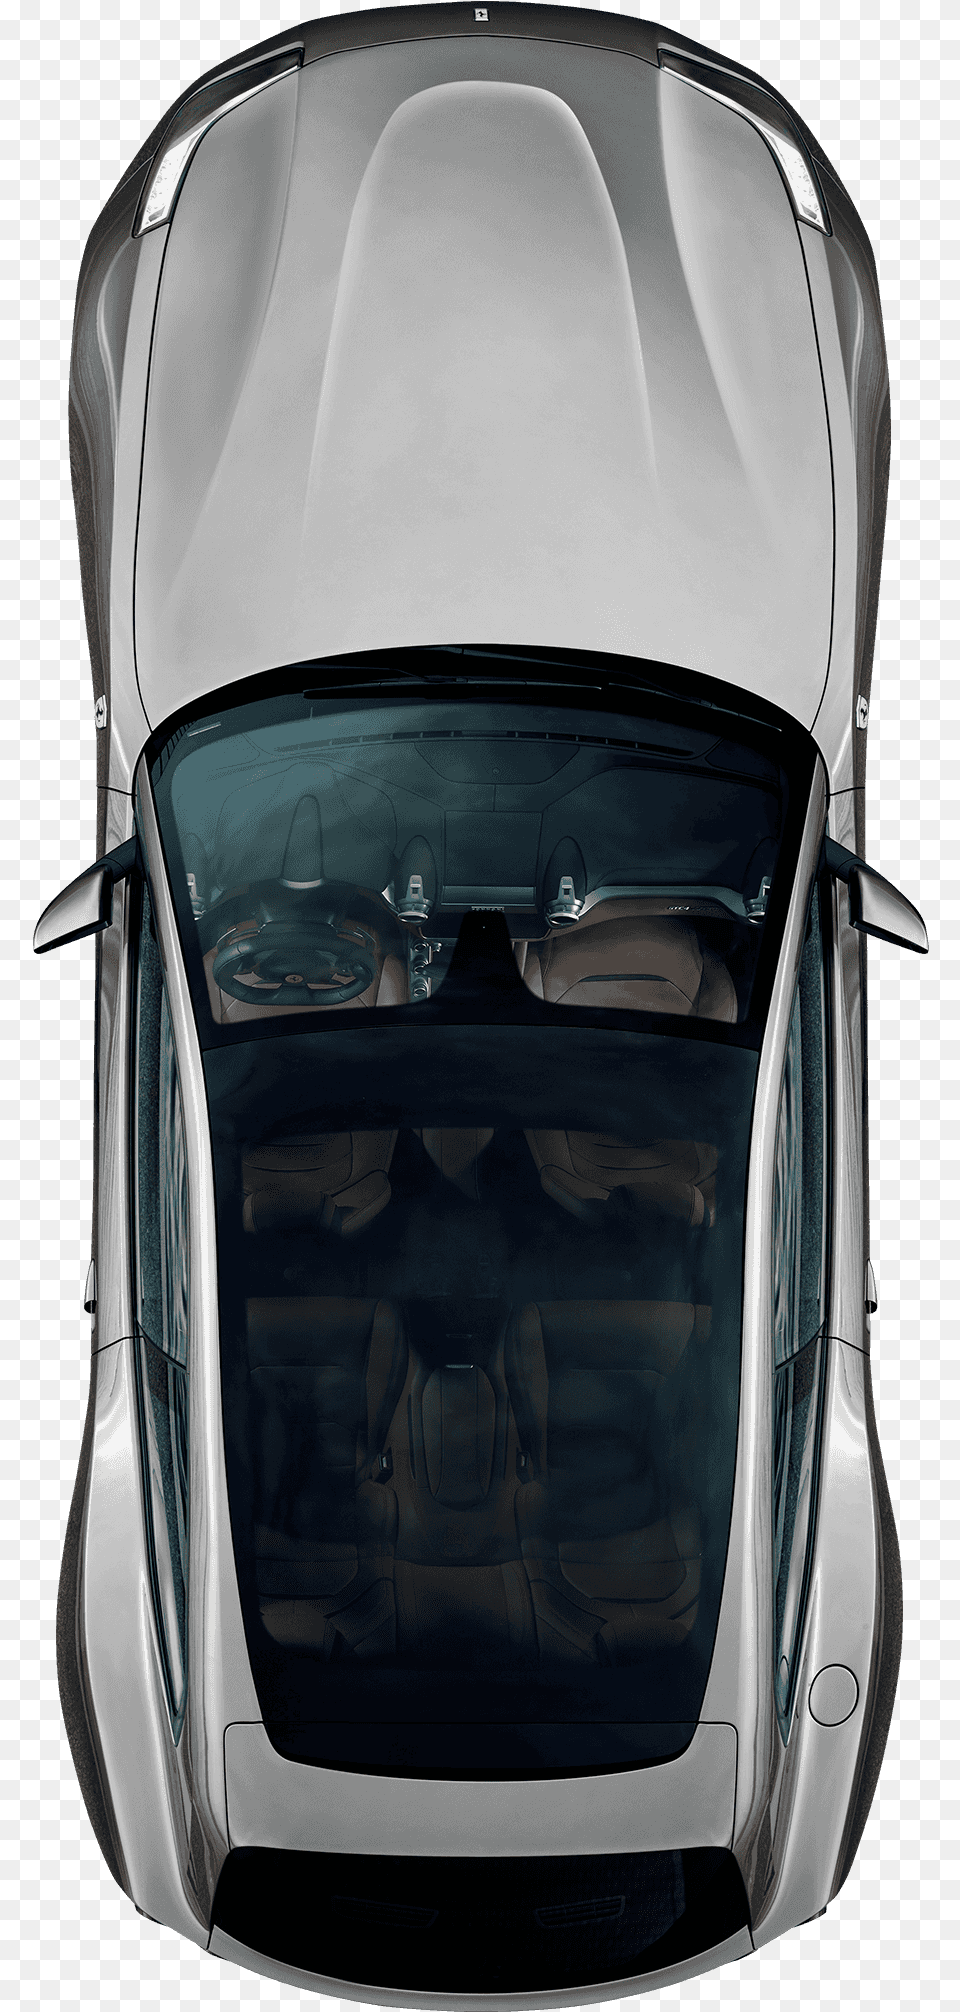 Download Hd Car Top View Ferrari Animated Car Top View Car From Top View, Transportation, Vehicle, Windshield, Cushion Free Transparent Png